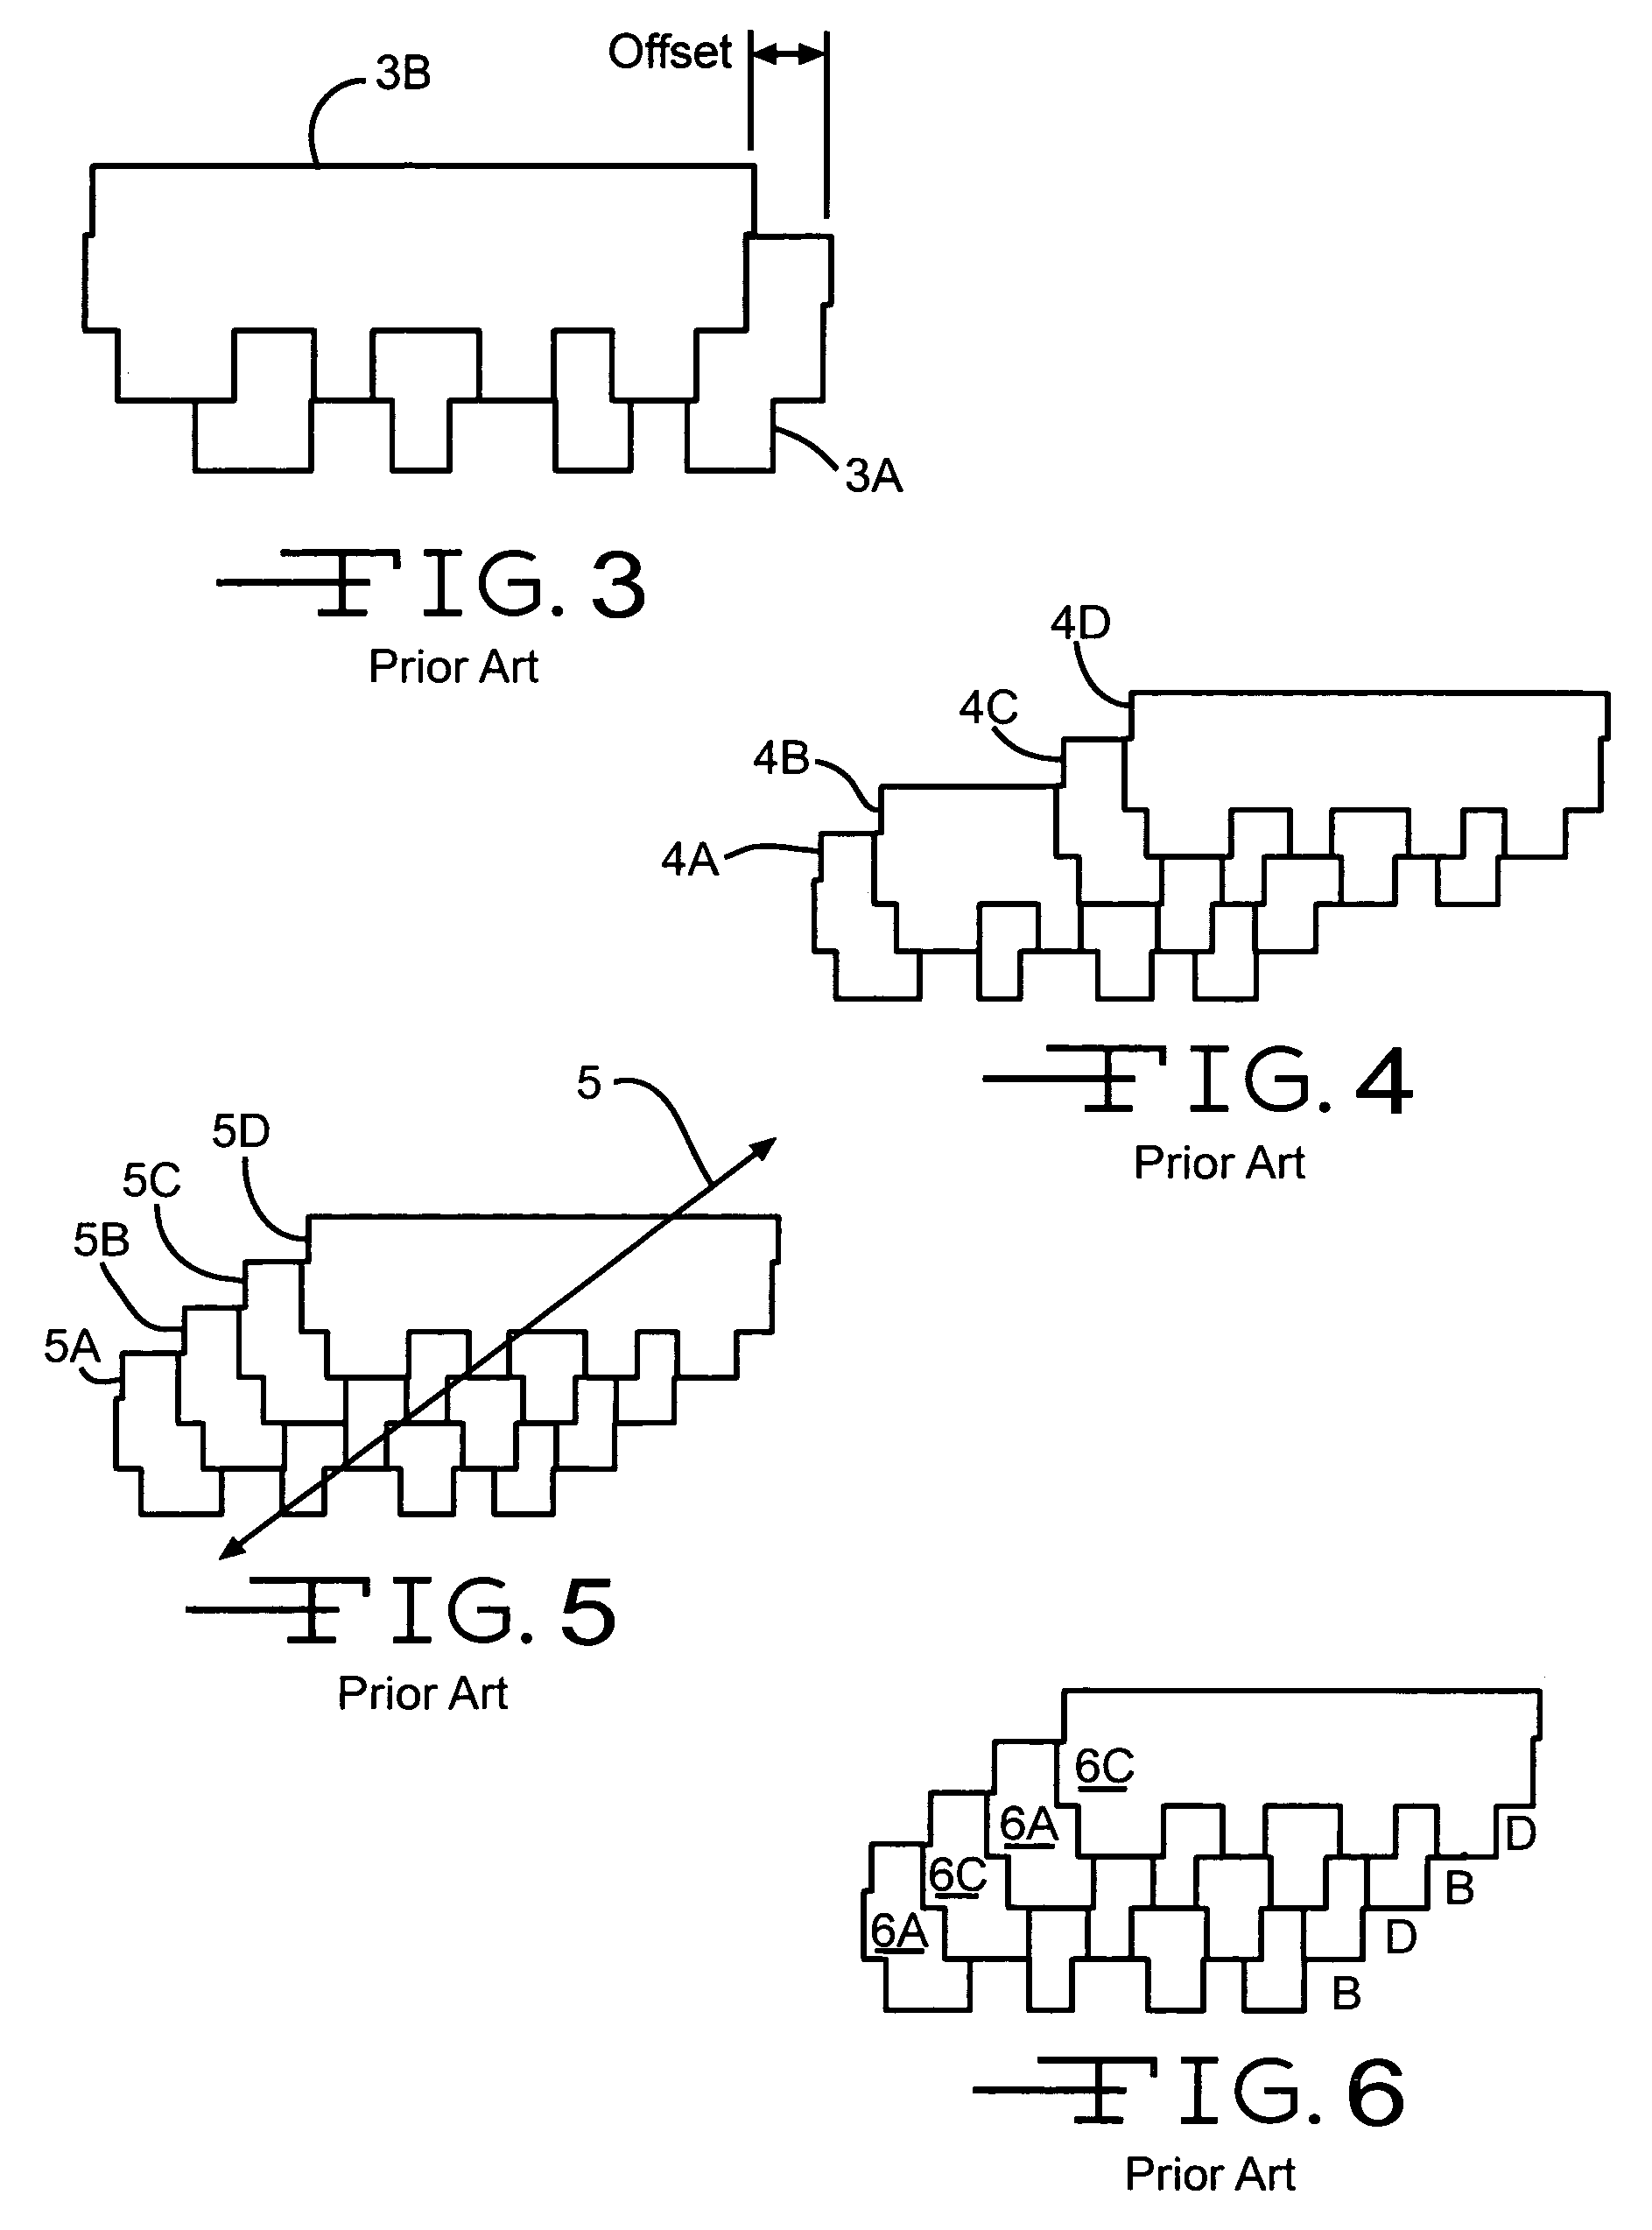 Three-around cutting pattern for title roofing material